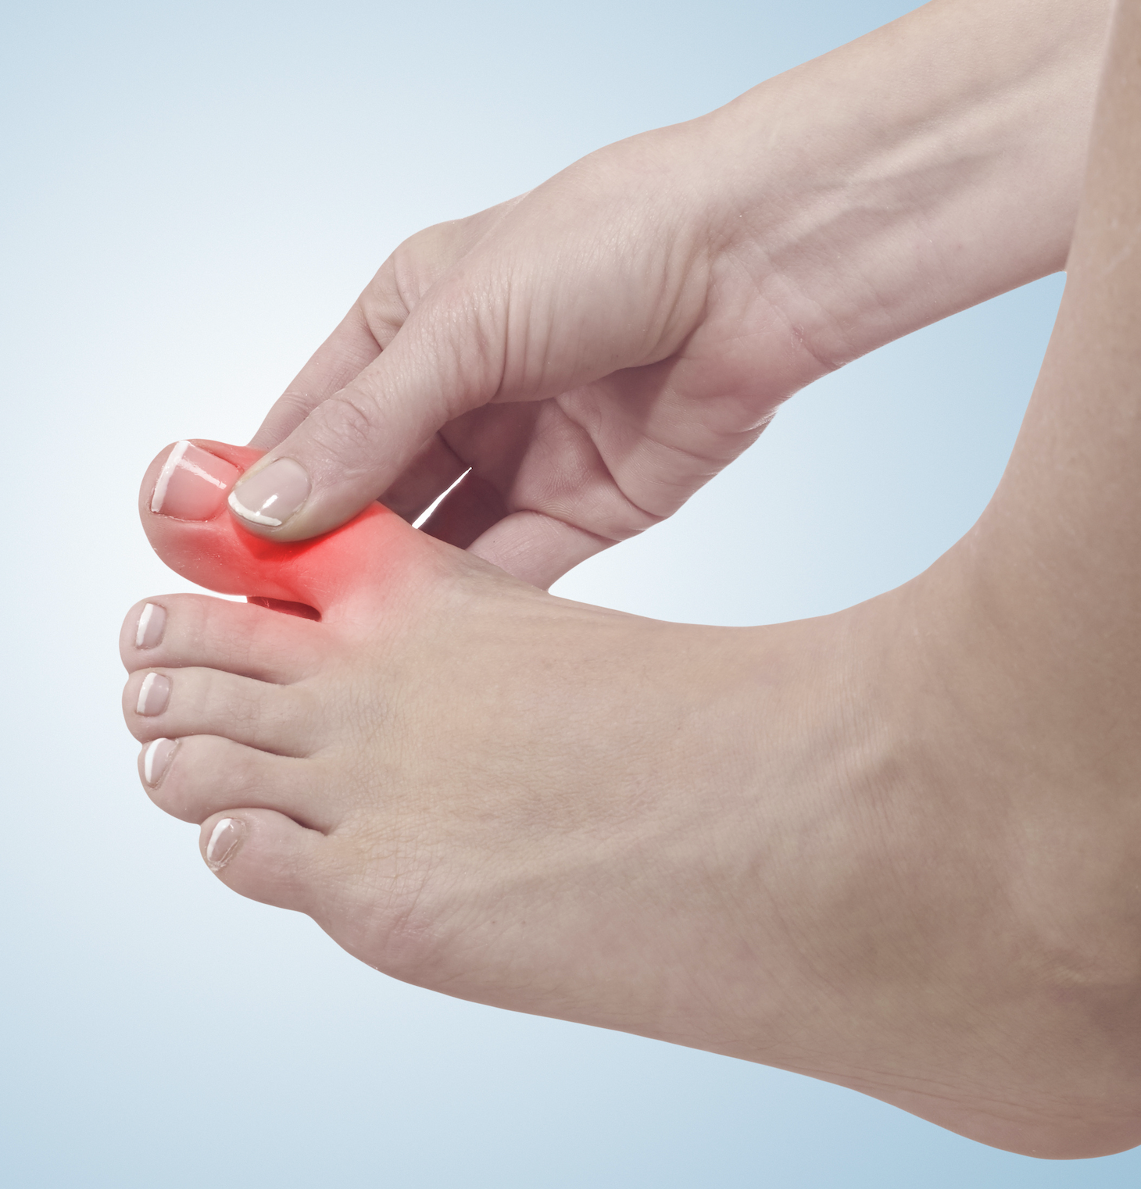 Gout Prevalence Estimated to Increase More Than 70% by 2050 